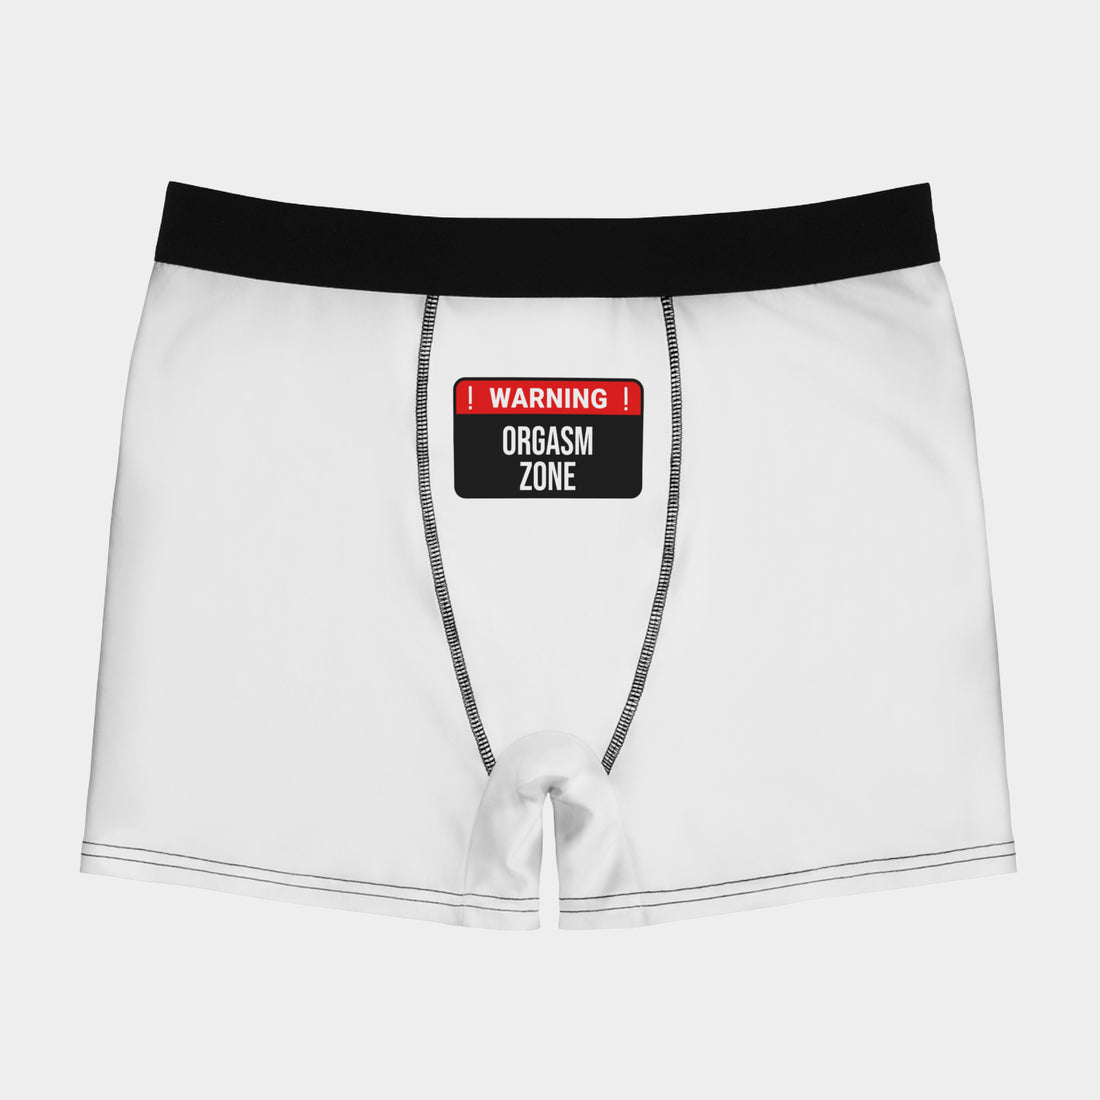 Spicy Personalized Boxers Men